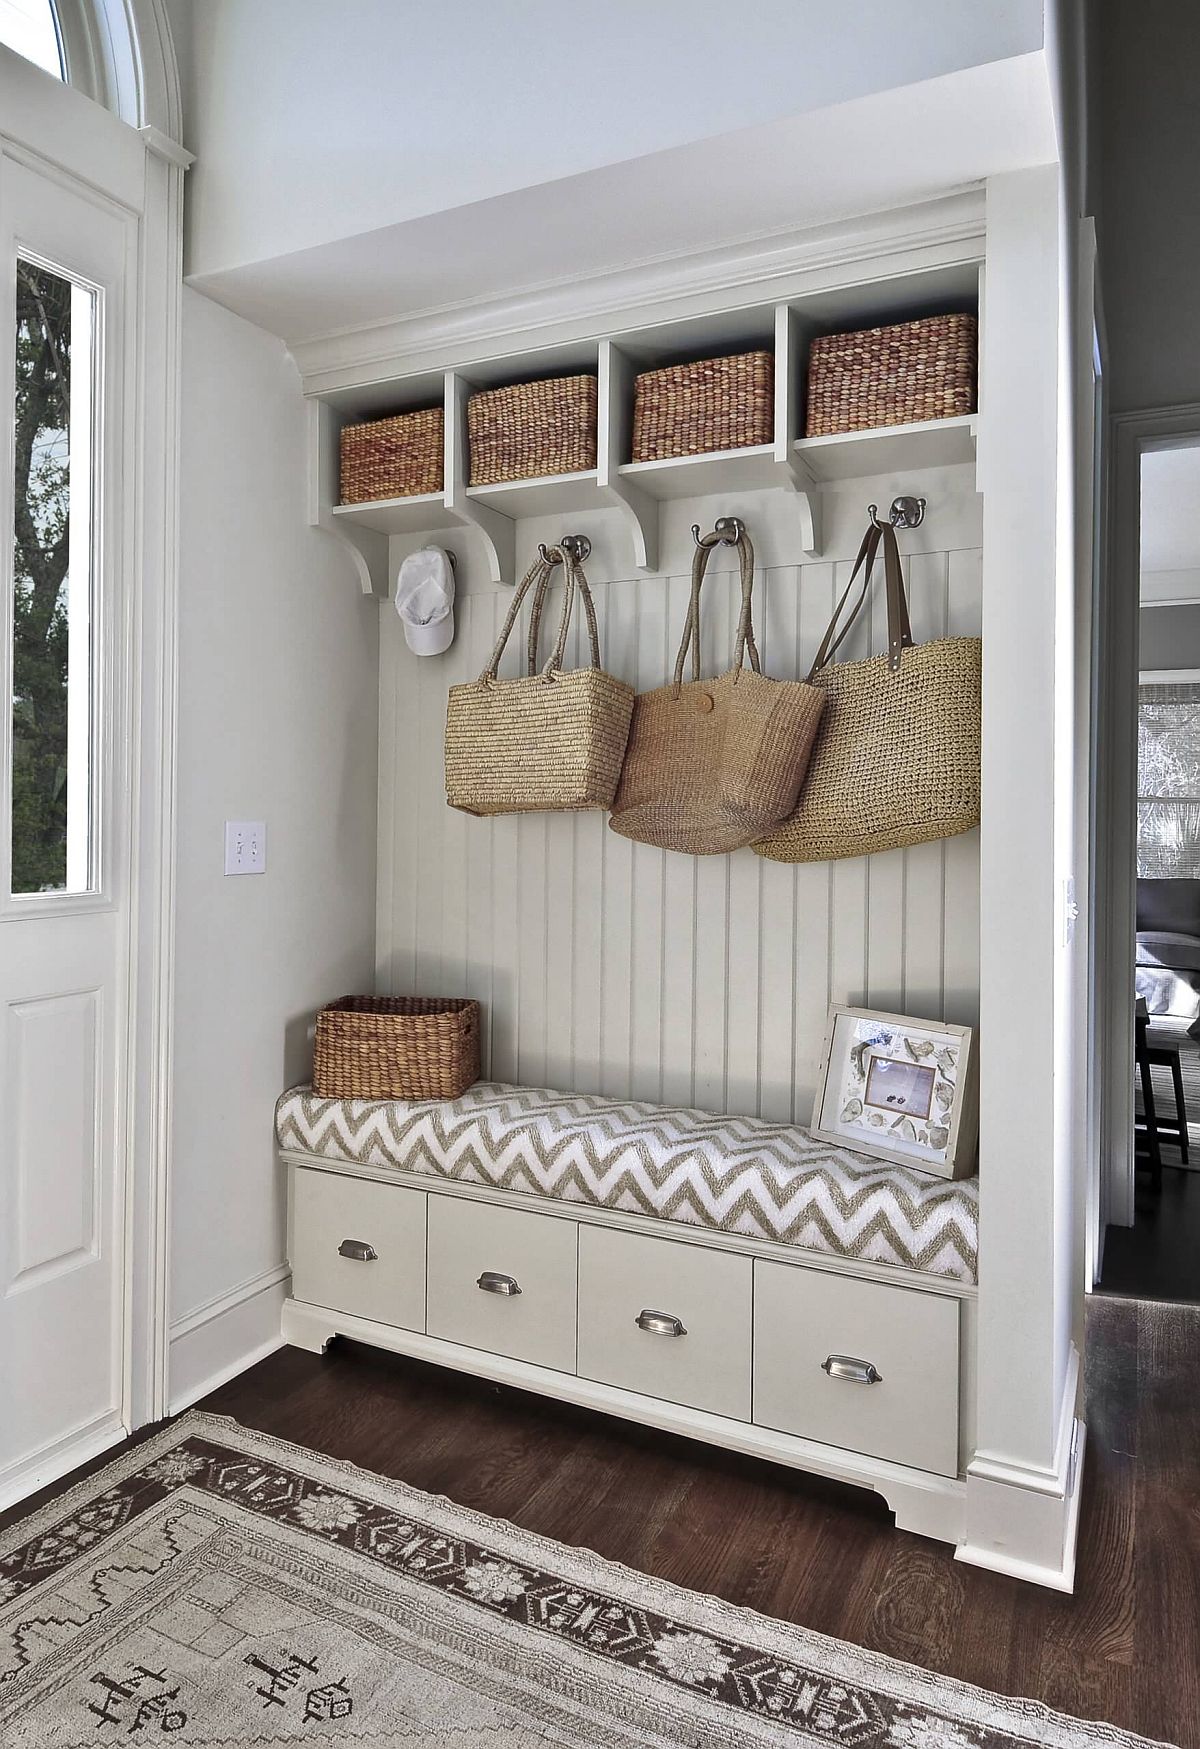 Baskets on the upper level along with cubbies create ample space in this mudroom